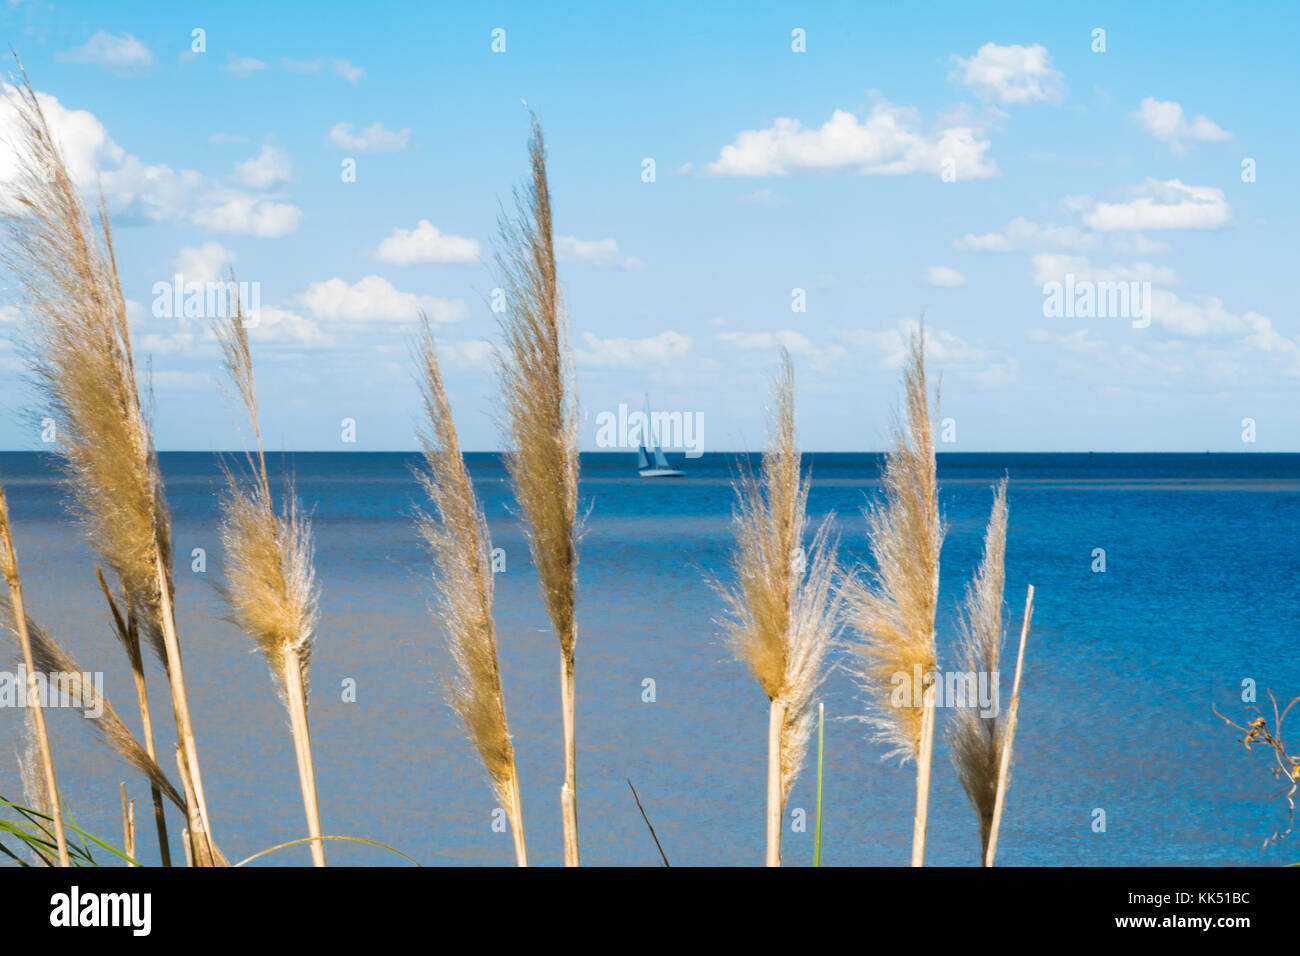 Beautiful blue sky with white clouds and Rio de La Plata horizon with vegetation in the foreground. Stock Photo